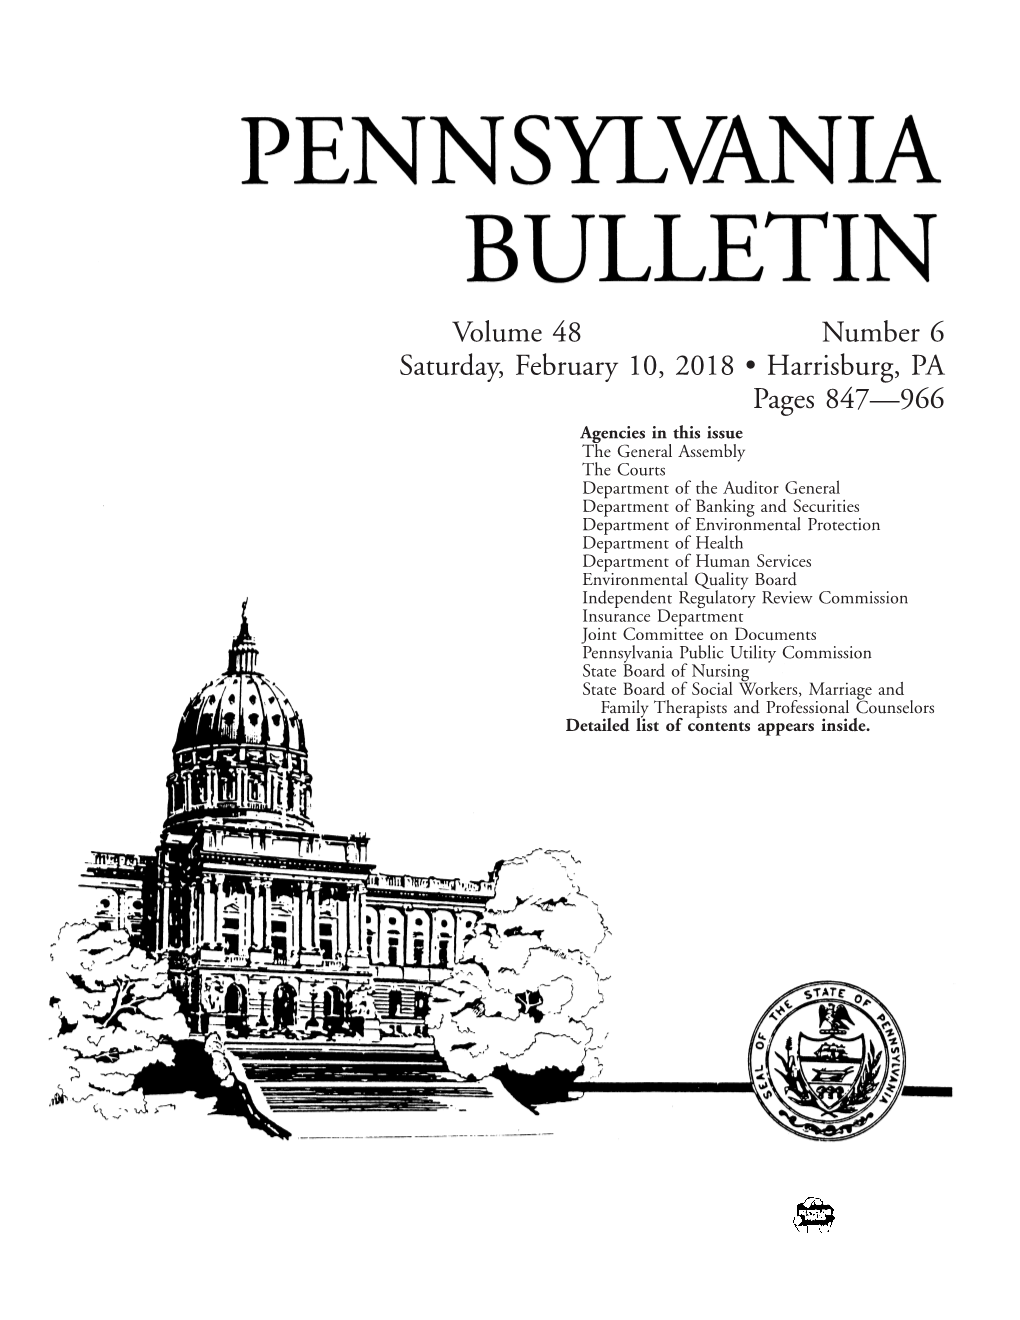 Reader's Guide to the Pennsylvania Bulletin and The